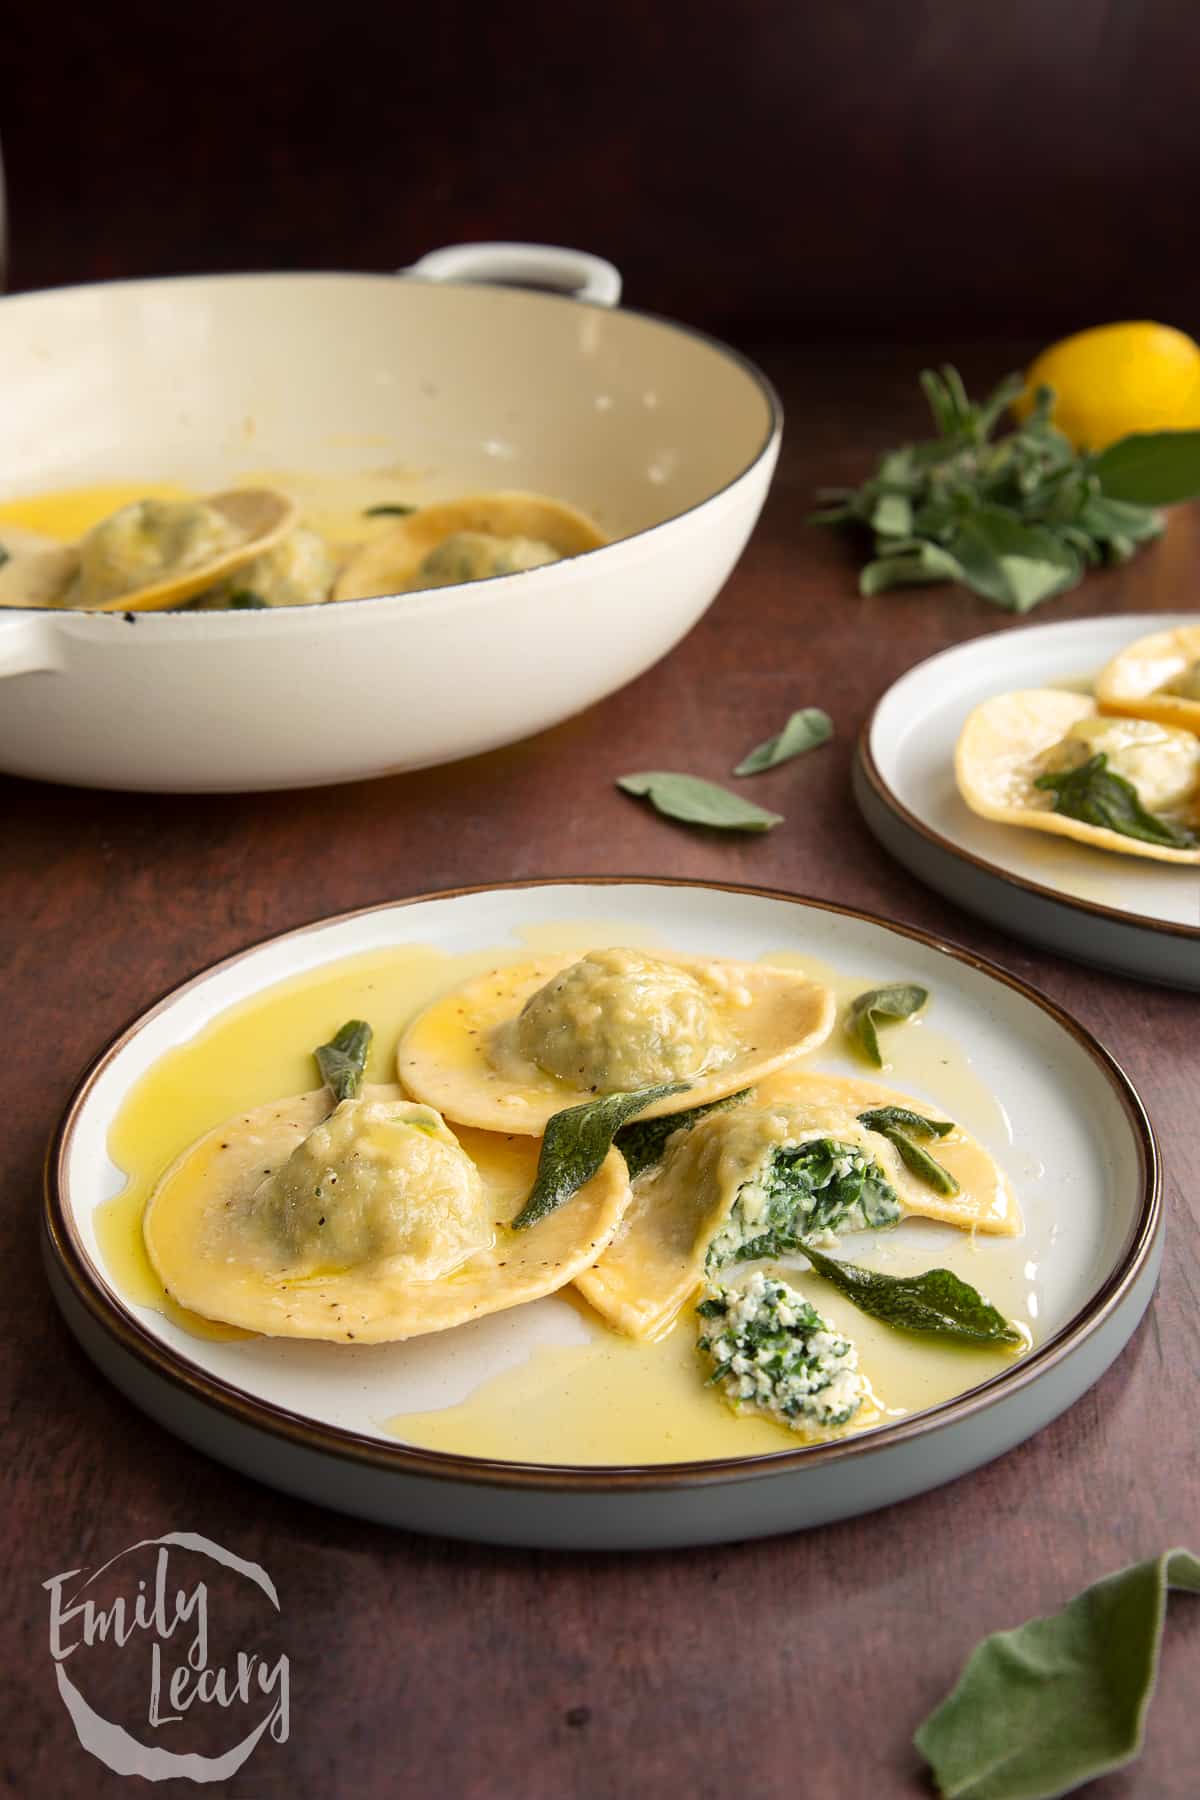 A plate of spinach and ricotta ravioli with one of the ravioli pieces cut open.